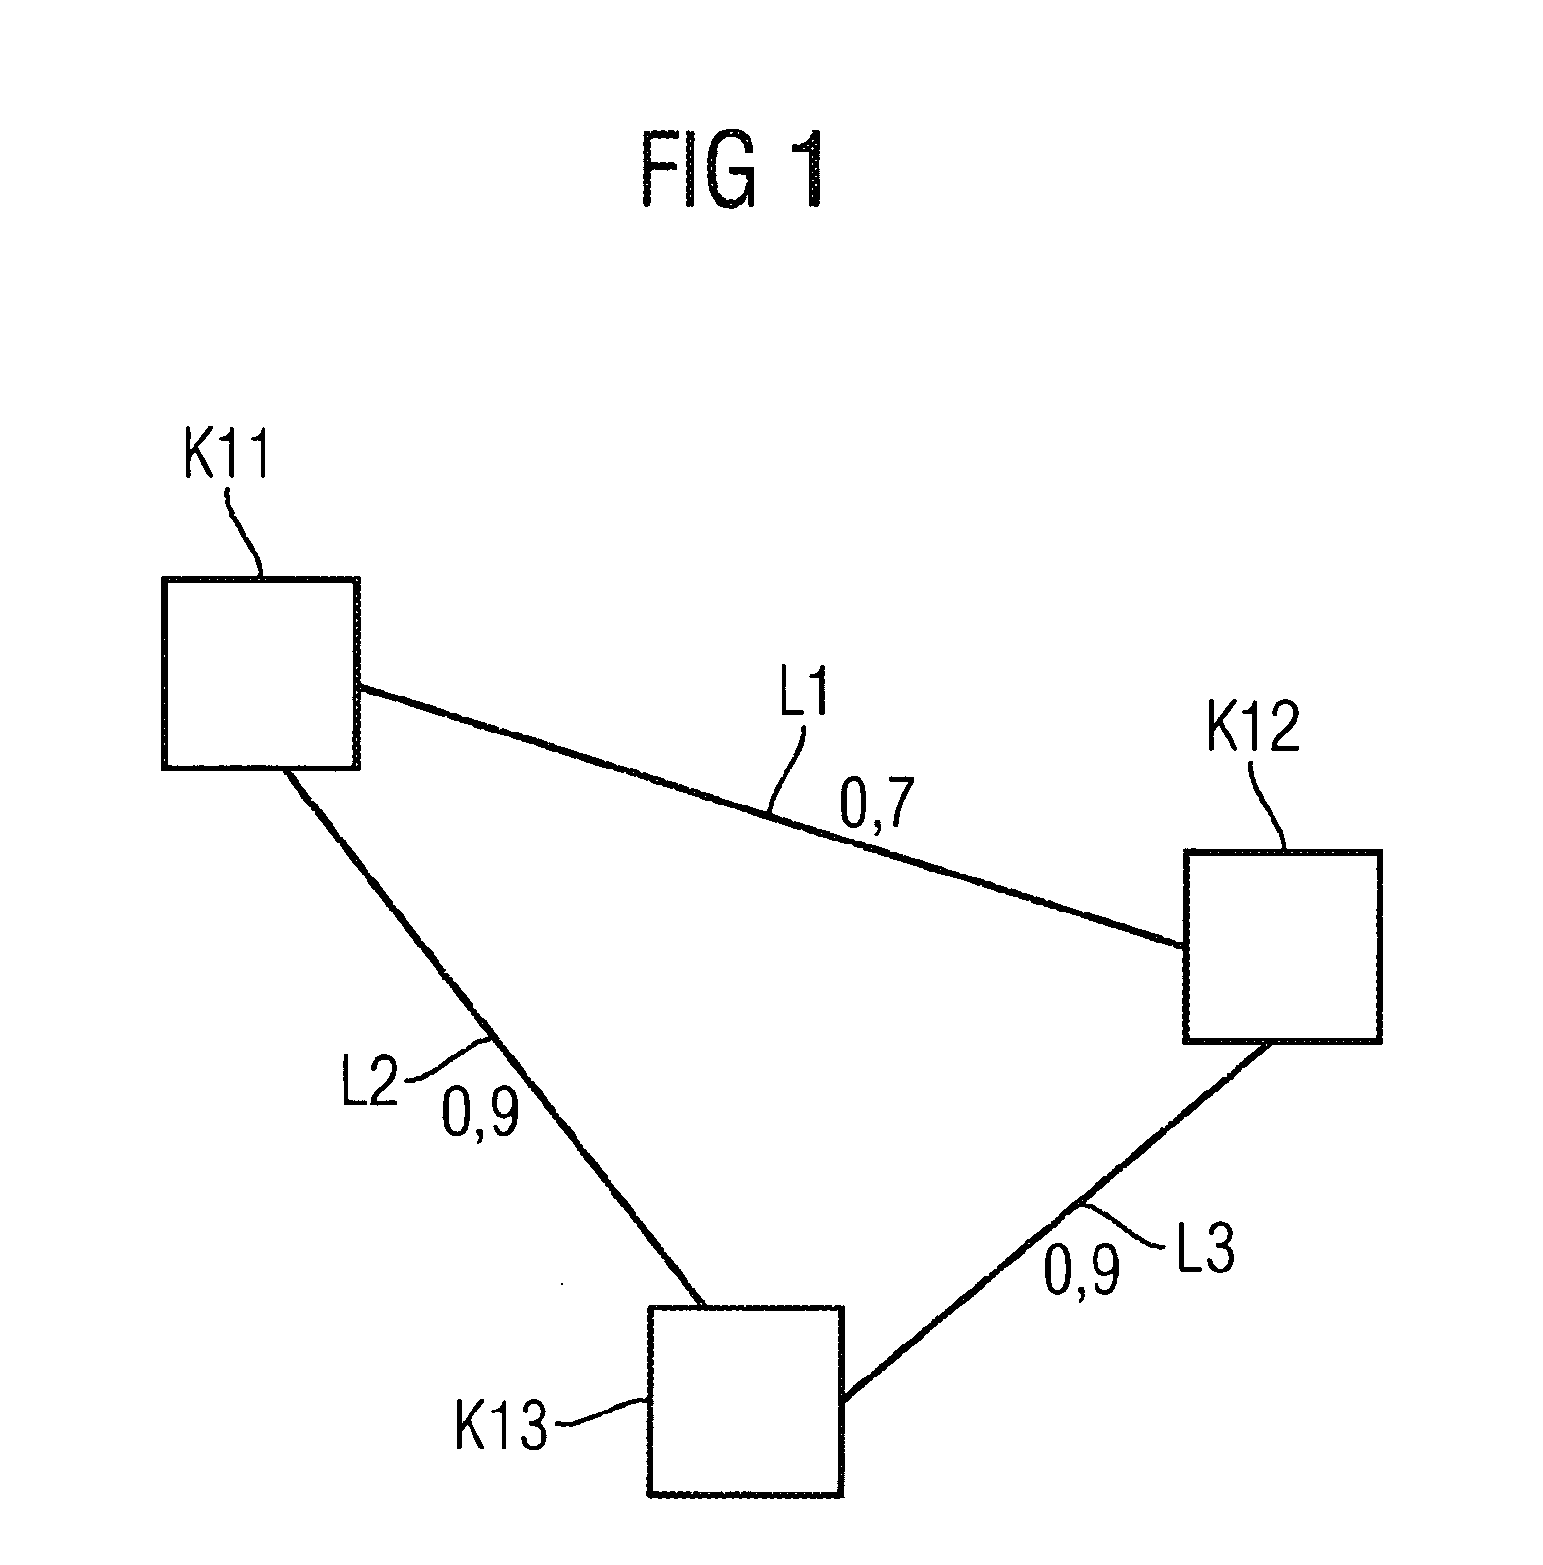 Method for Determining a Route Distance Value